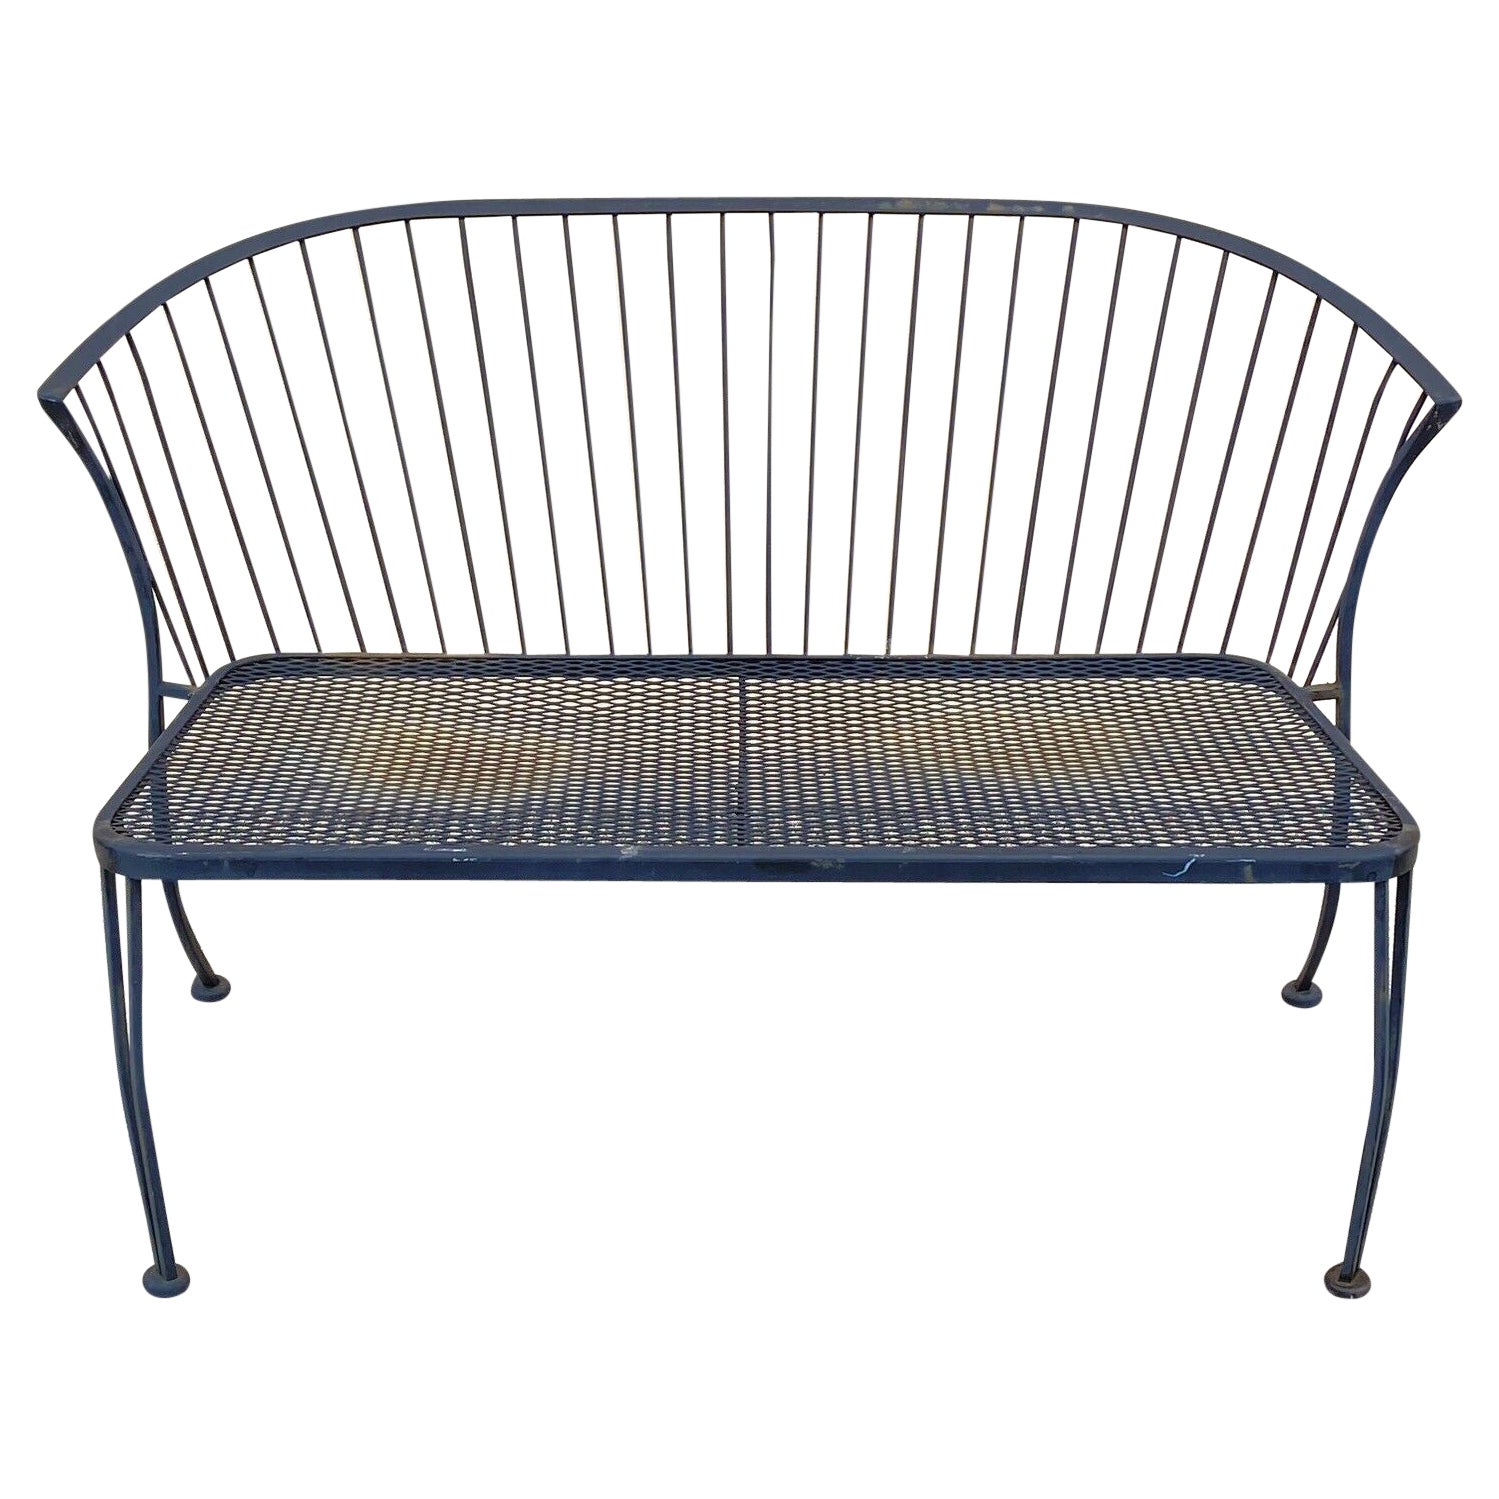 Russell Woodard Pinecrest Style Wrought Iron Garden Patio Loveseat Bench For Sale